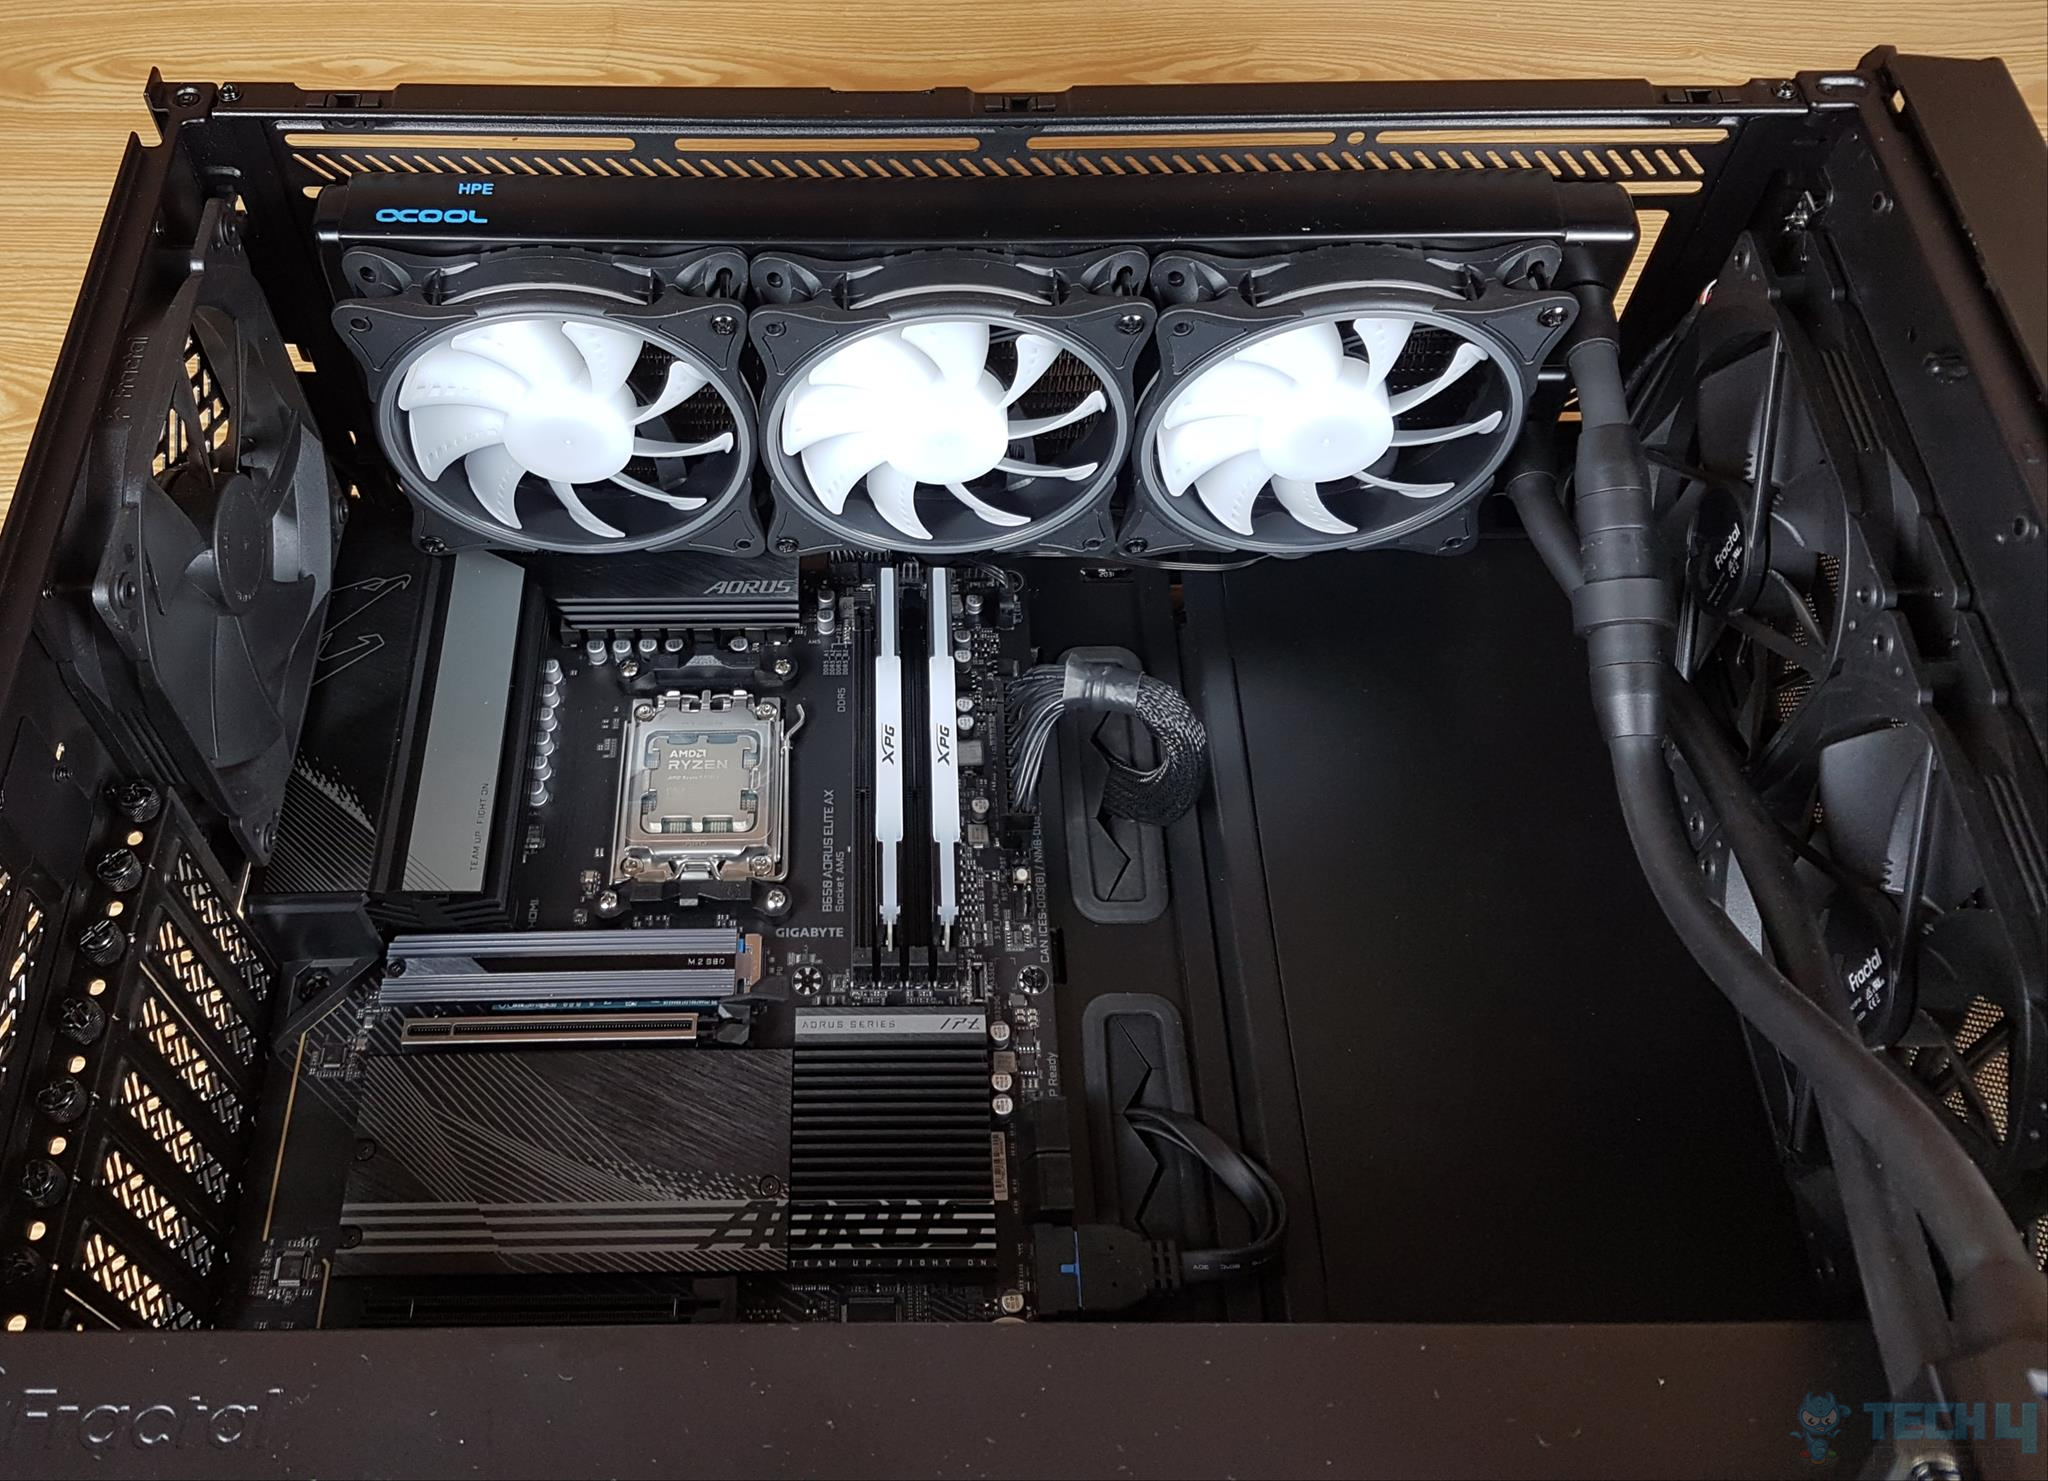 Fractal Design Meshify 2 — Installing the radiator and fans